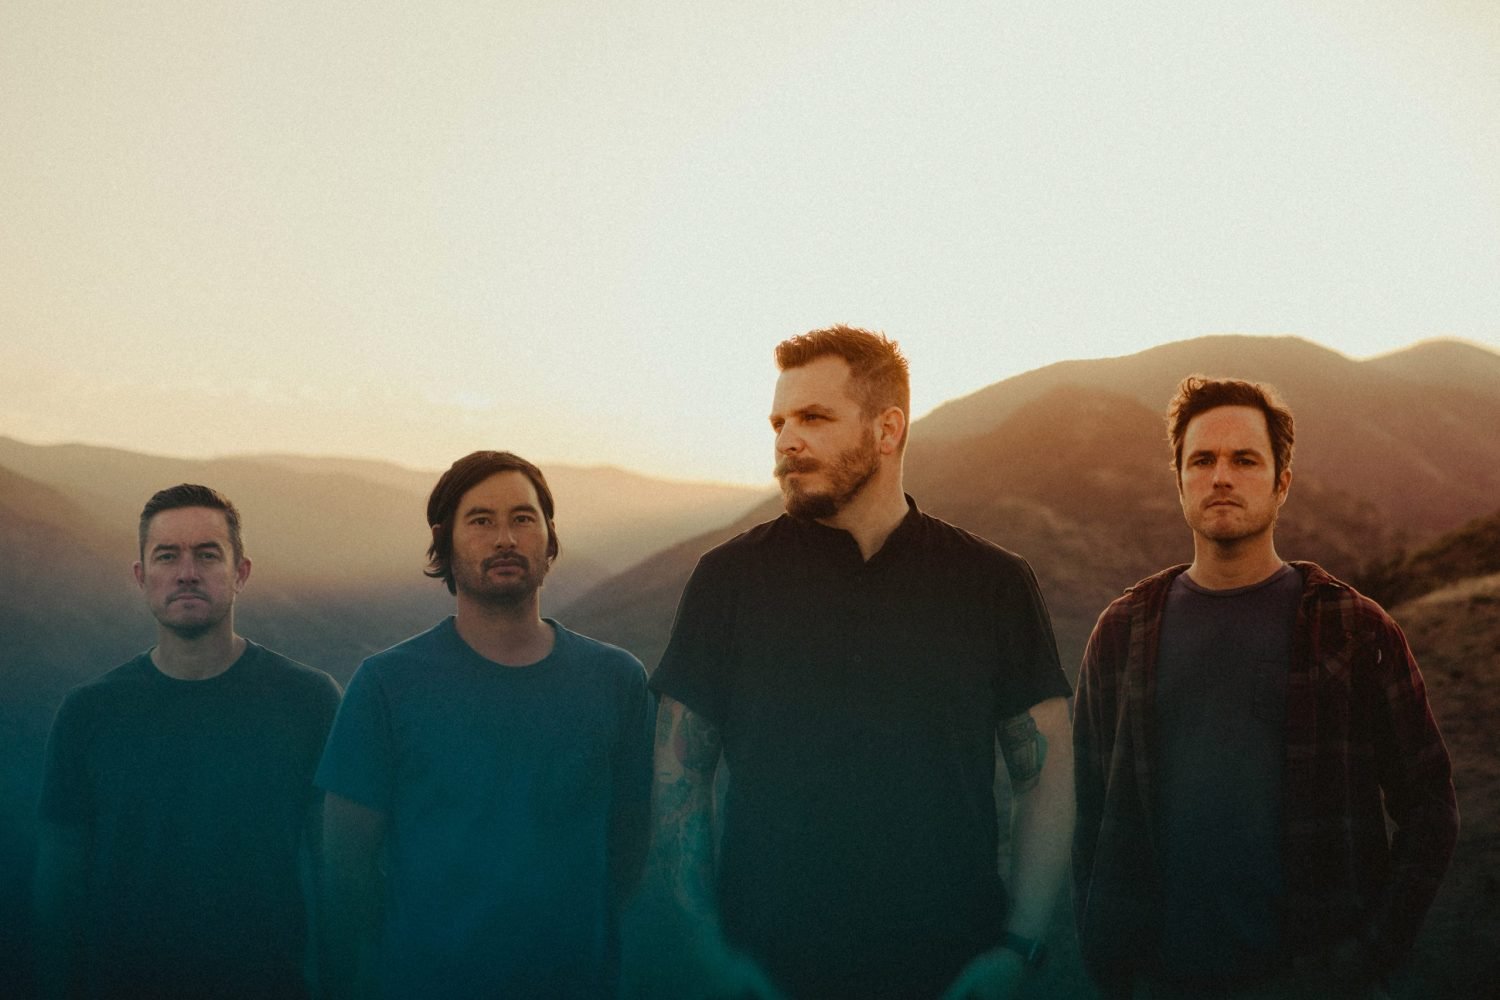 THRICE ANNOUNCE ‘THE ARTIST IN THE AMBULANCE’ 20TH ANNIVERSARY TOUR